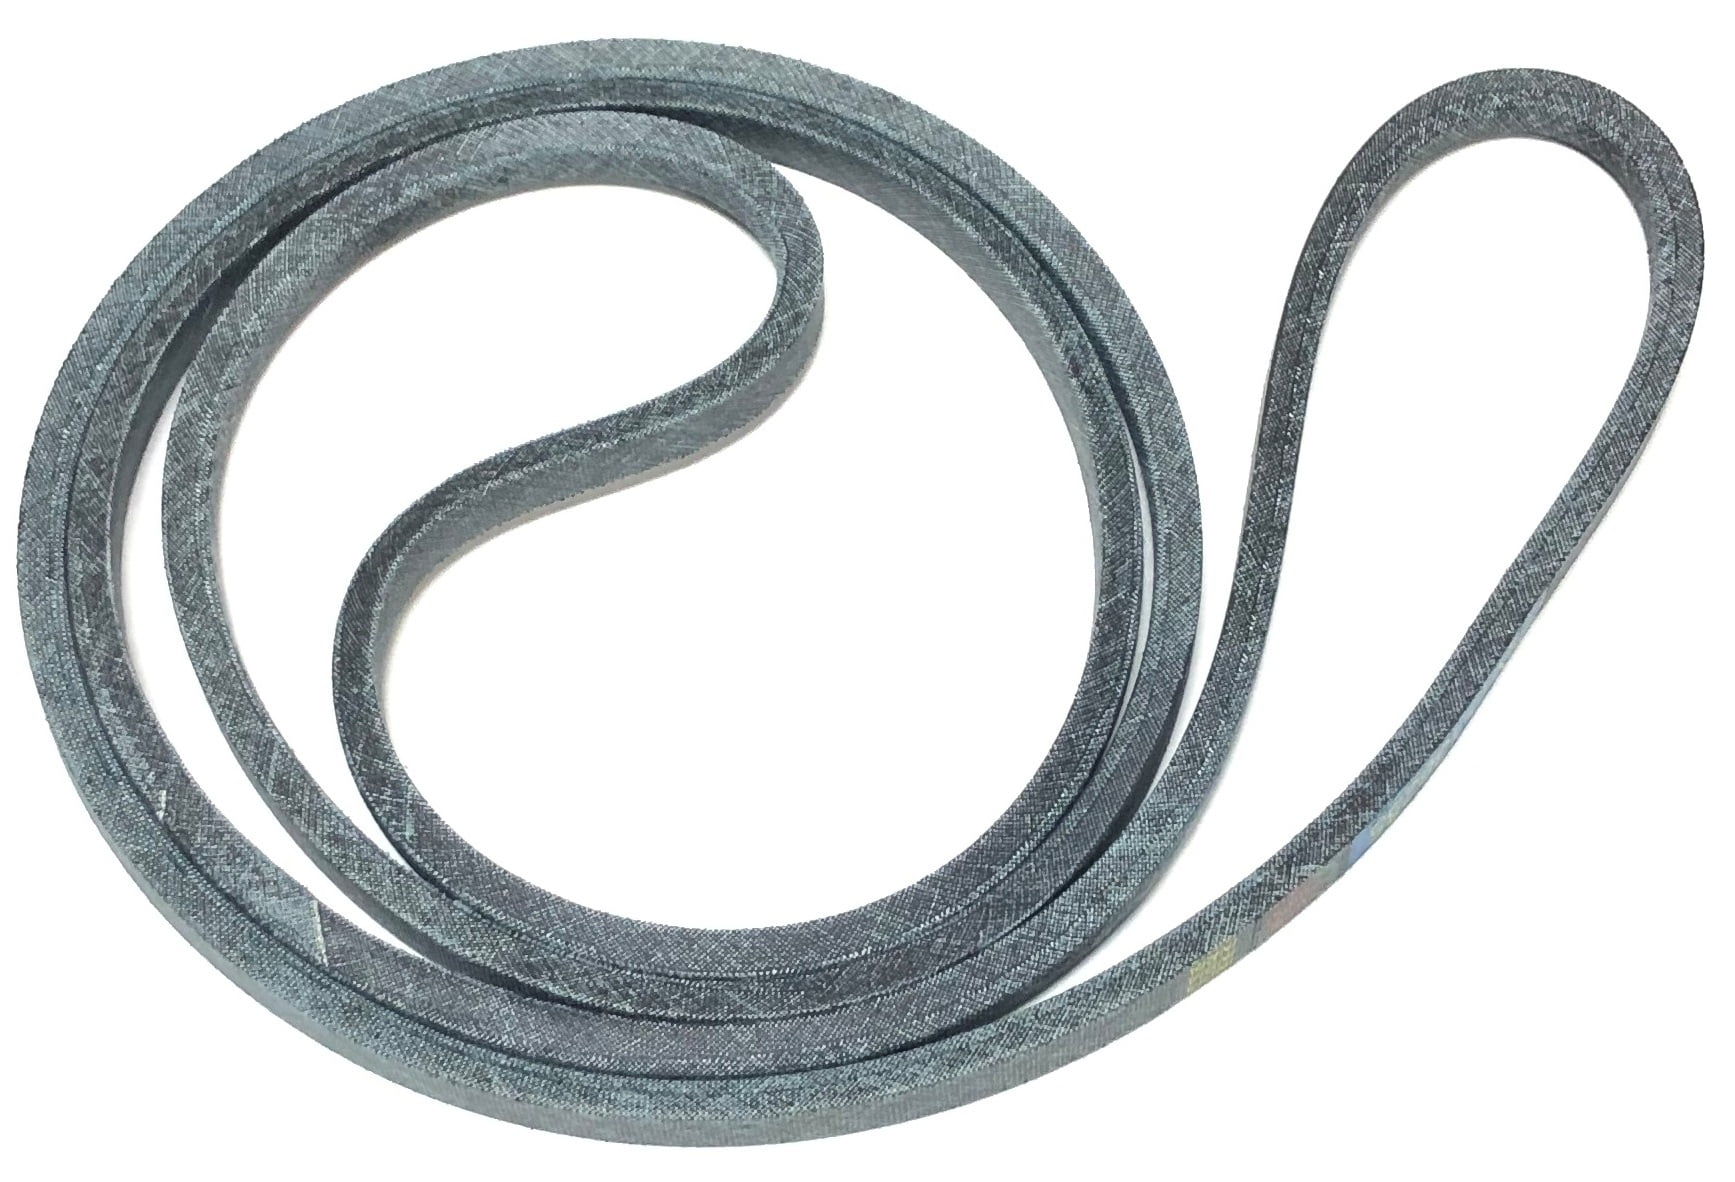 AYP AMERICAN YARD PRODUCTS 138255 made with Kevlar Replacement Belt 